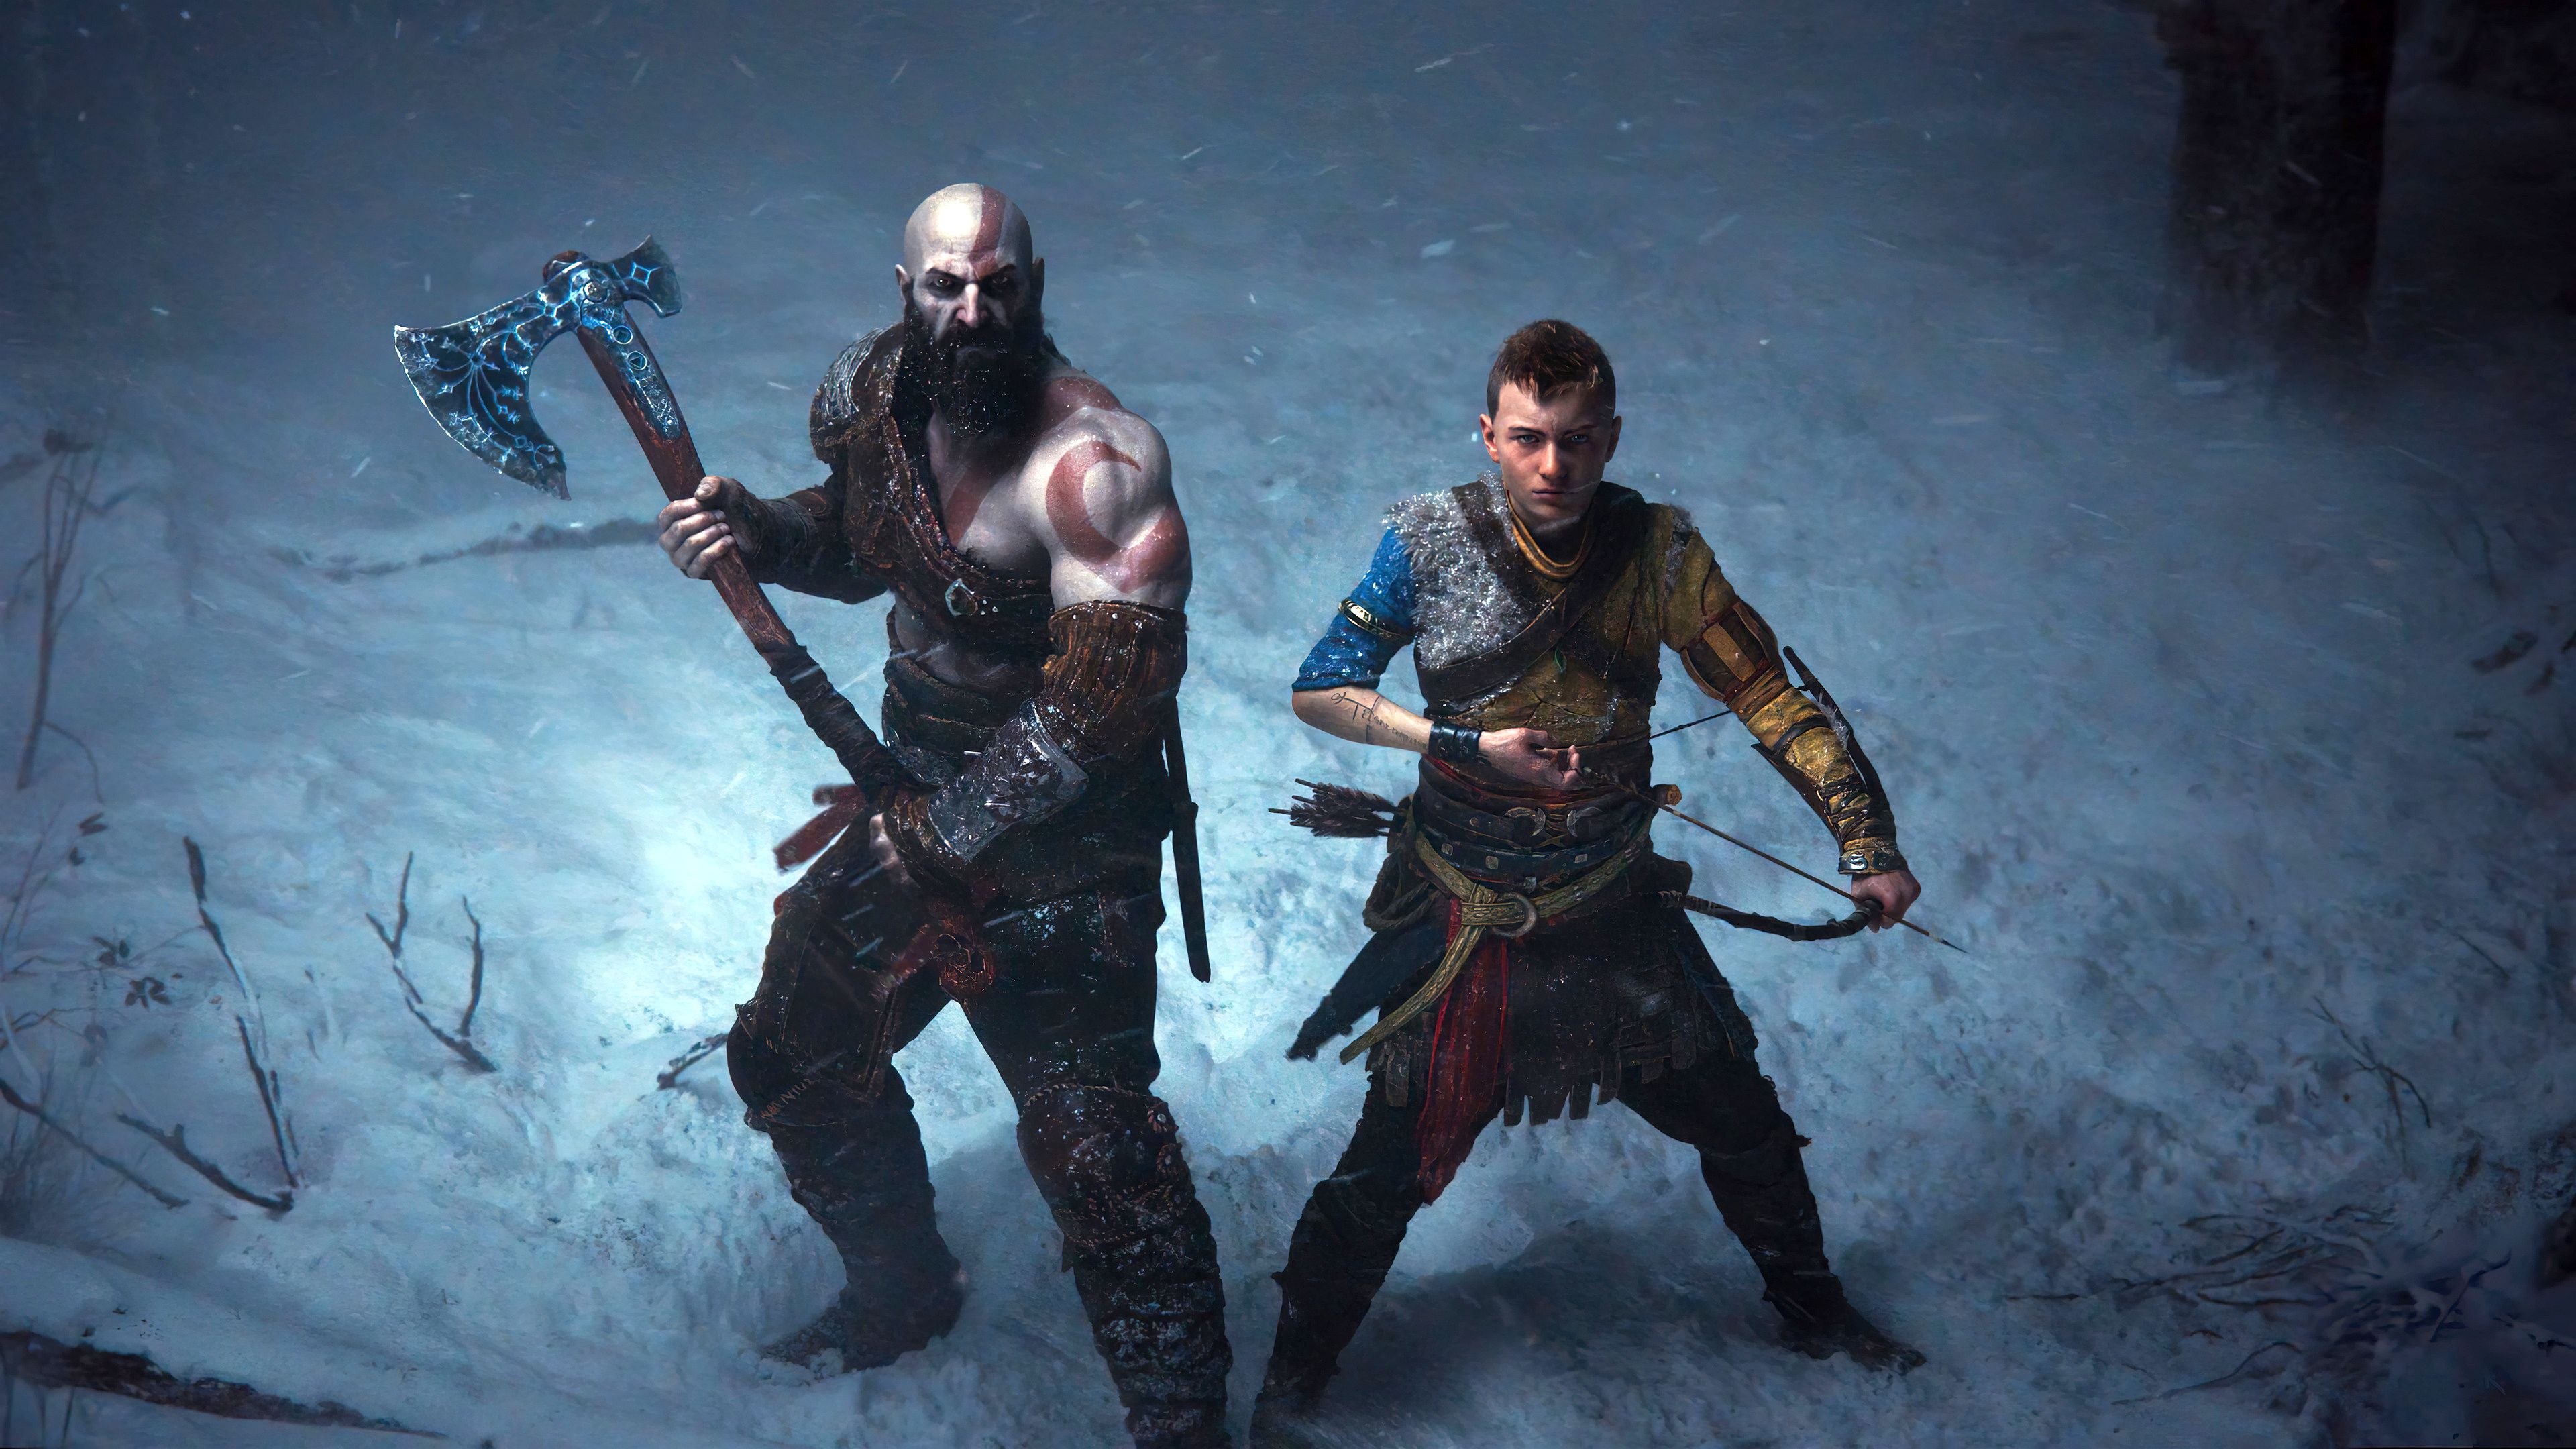 Image for PS5 sales reach 32.1 million and God of War Ragnarok is selling rather well